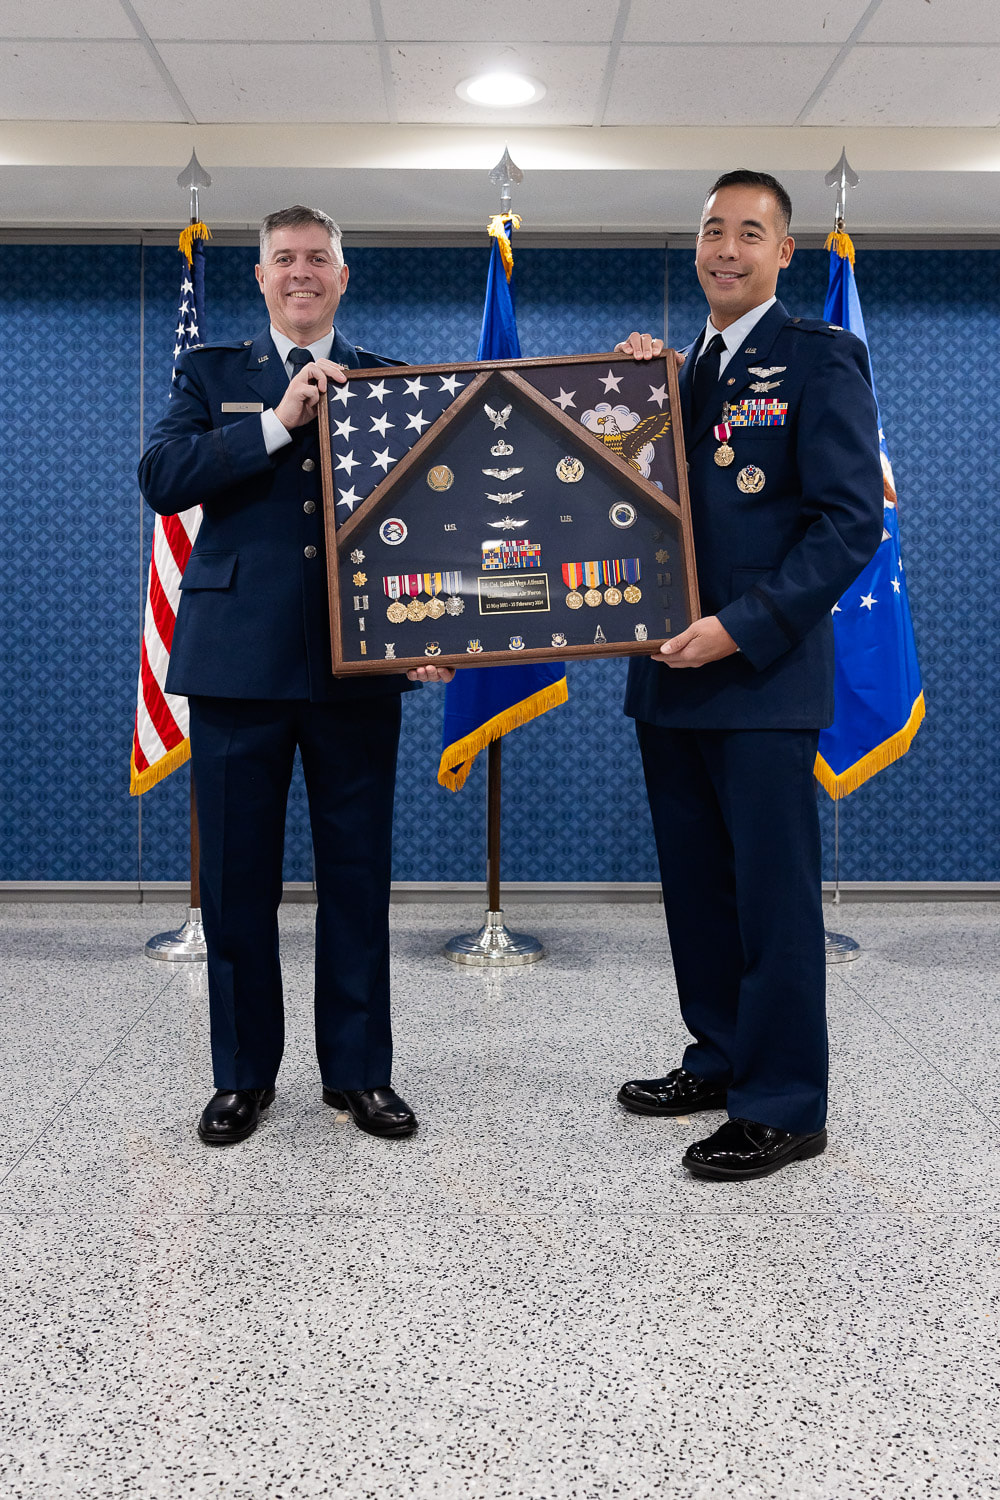 Lt Col Atienza receives his shadow box at his retirement ceremony inside the Pentagon